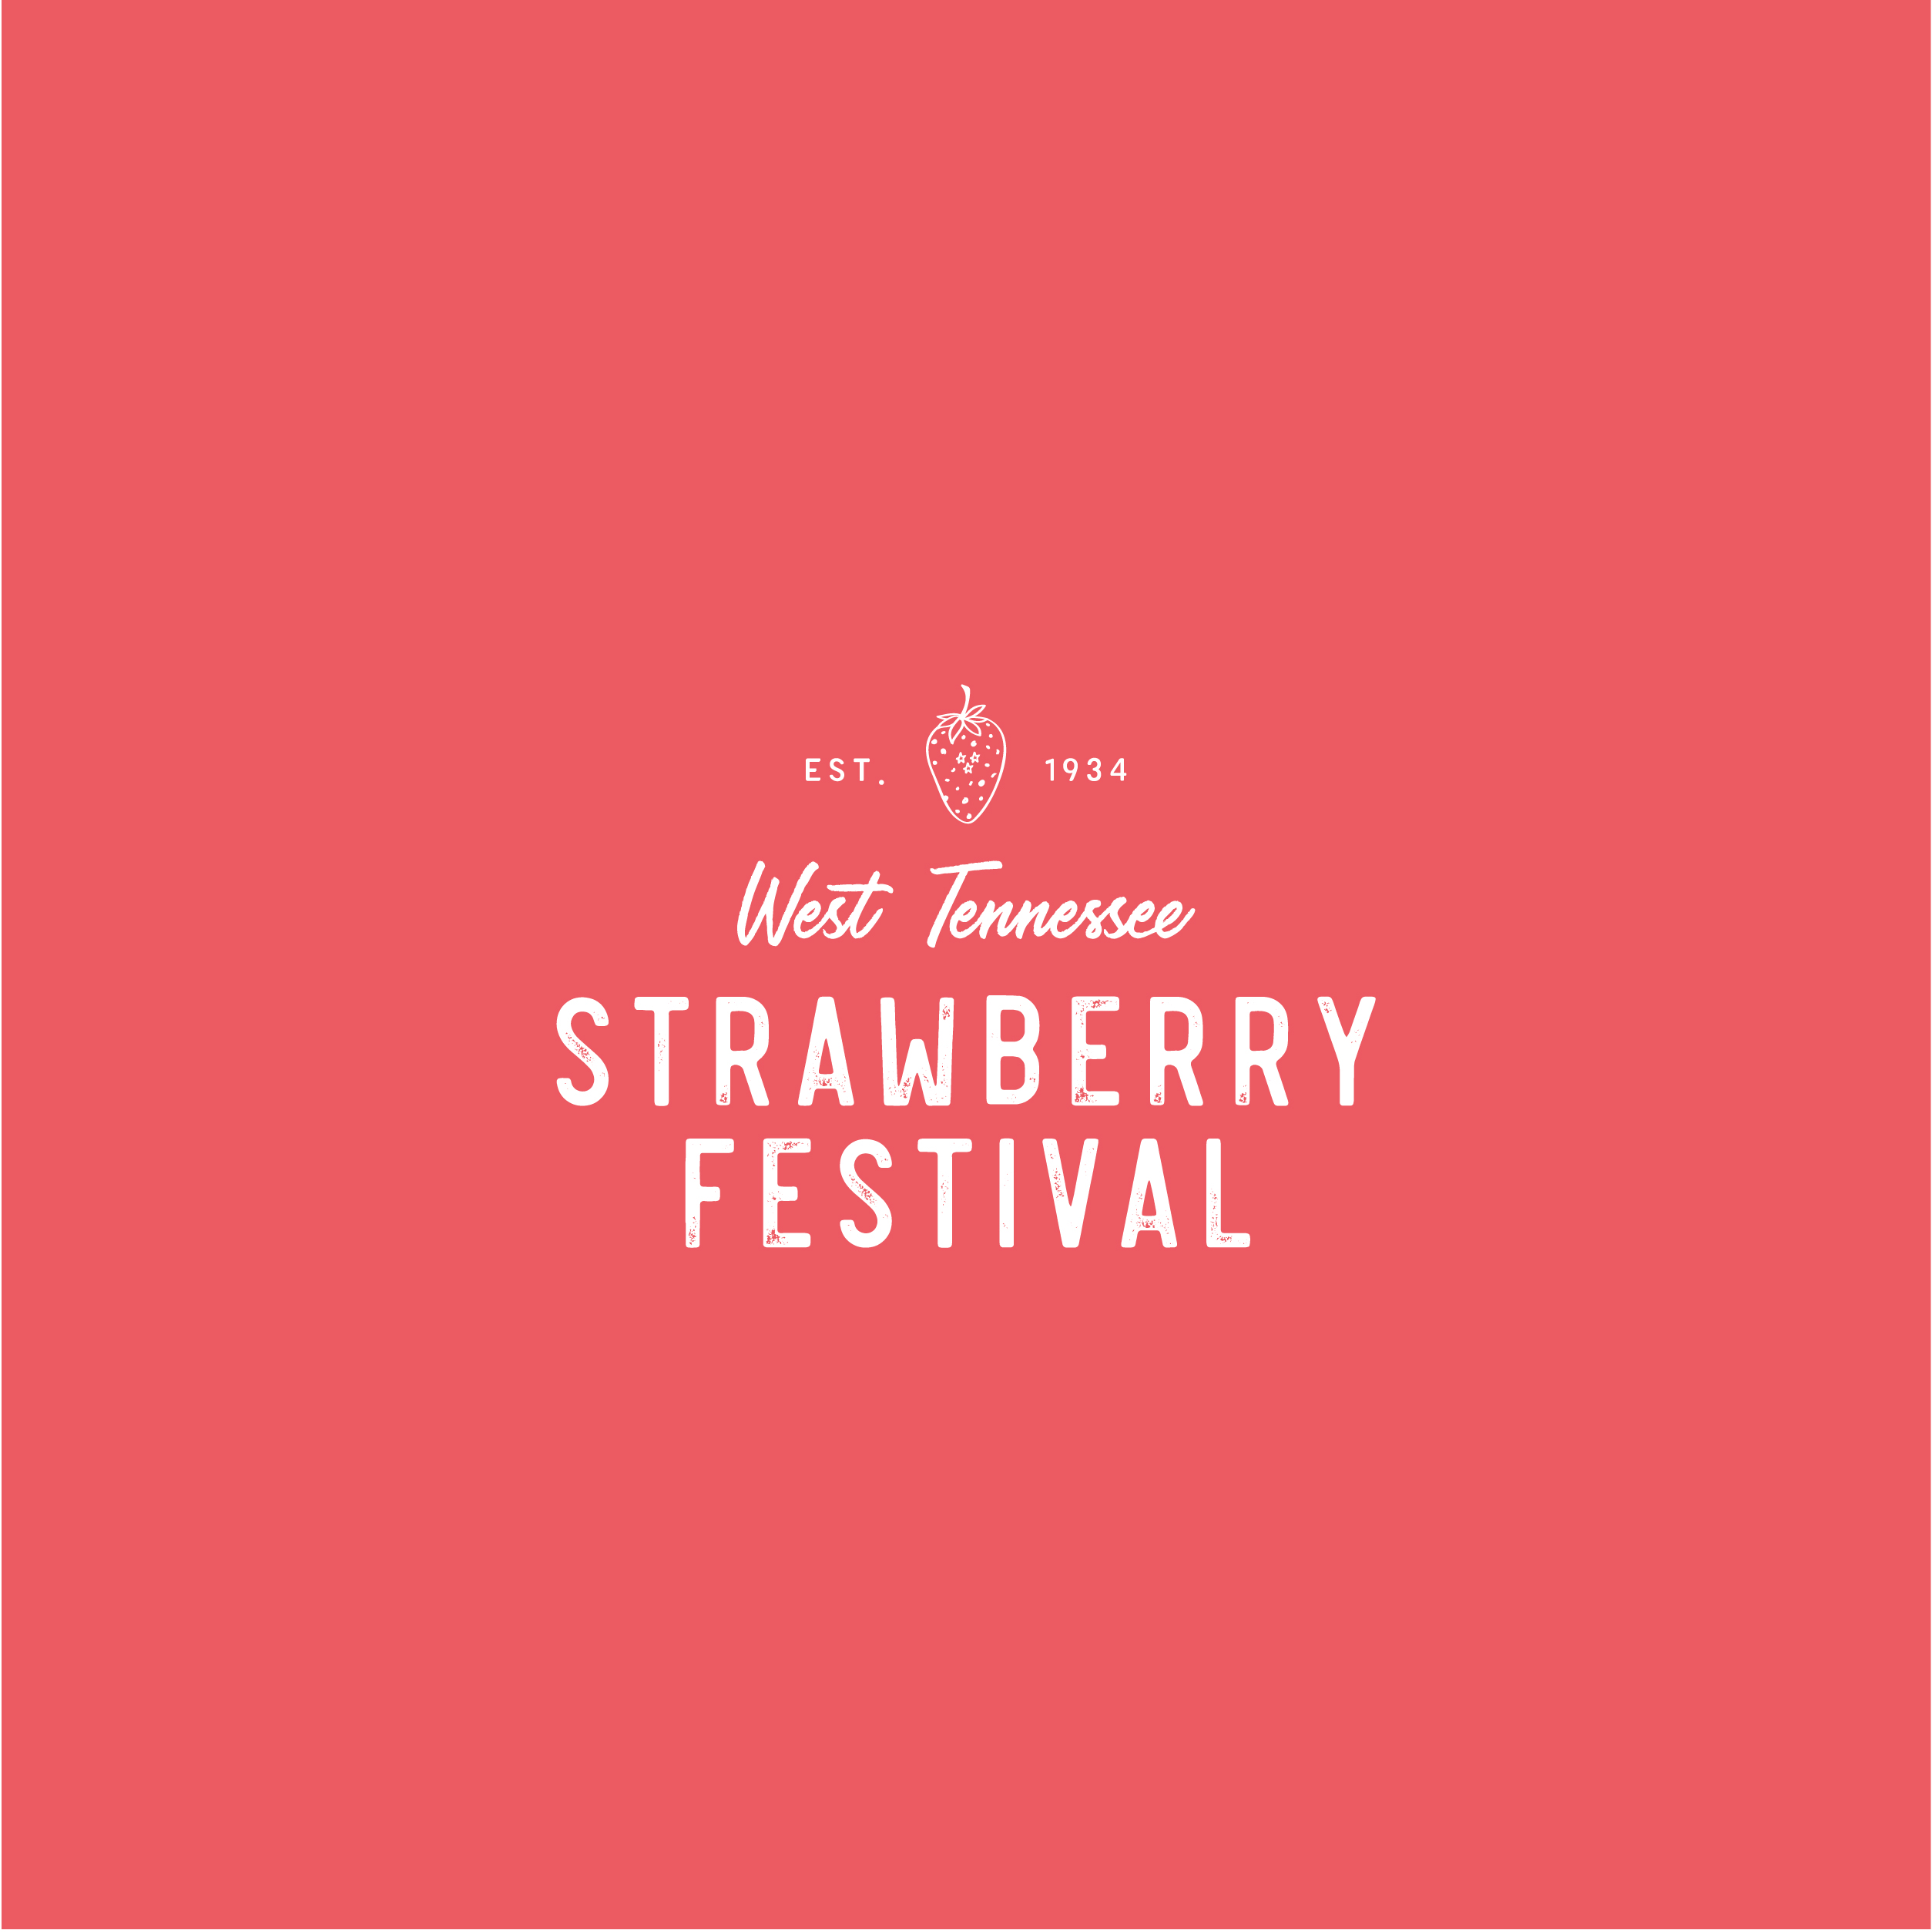 West Tennessee Strawberry Festival Branding - Fun, rustic brand and logo design